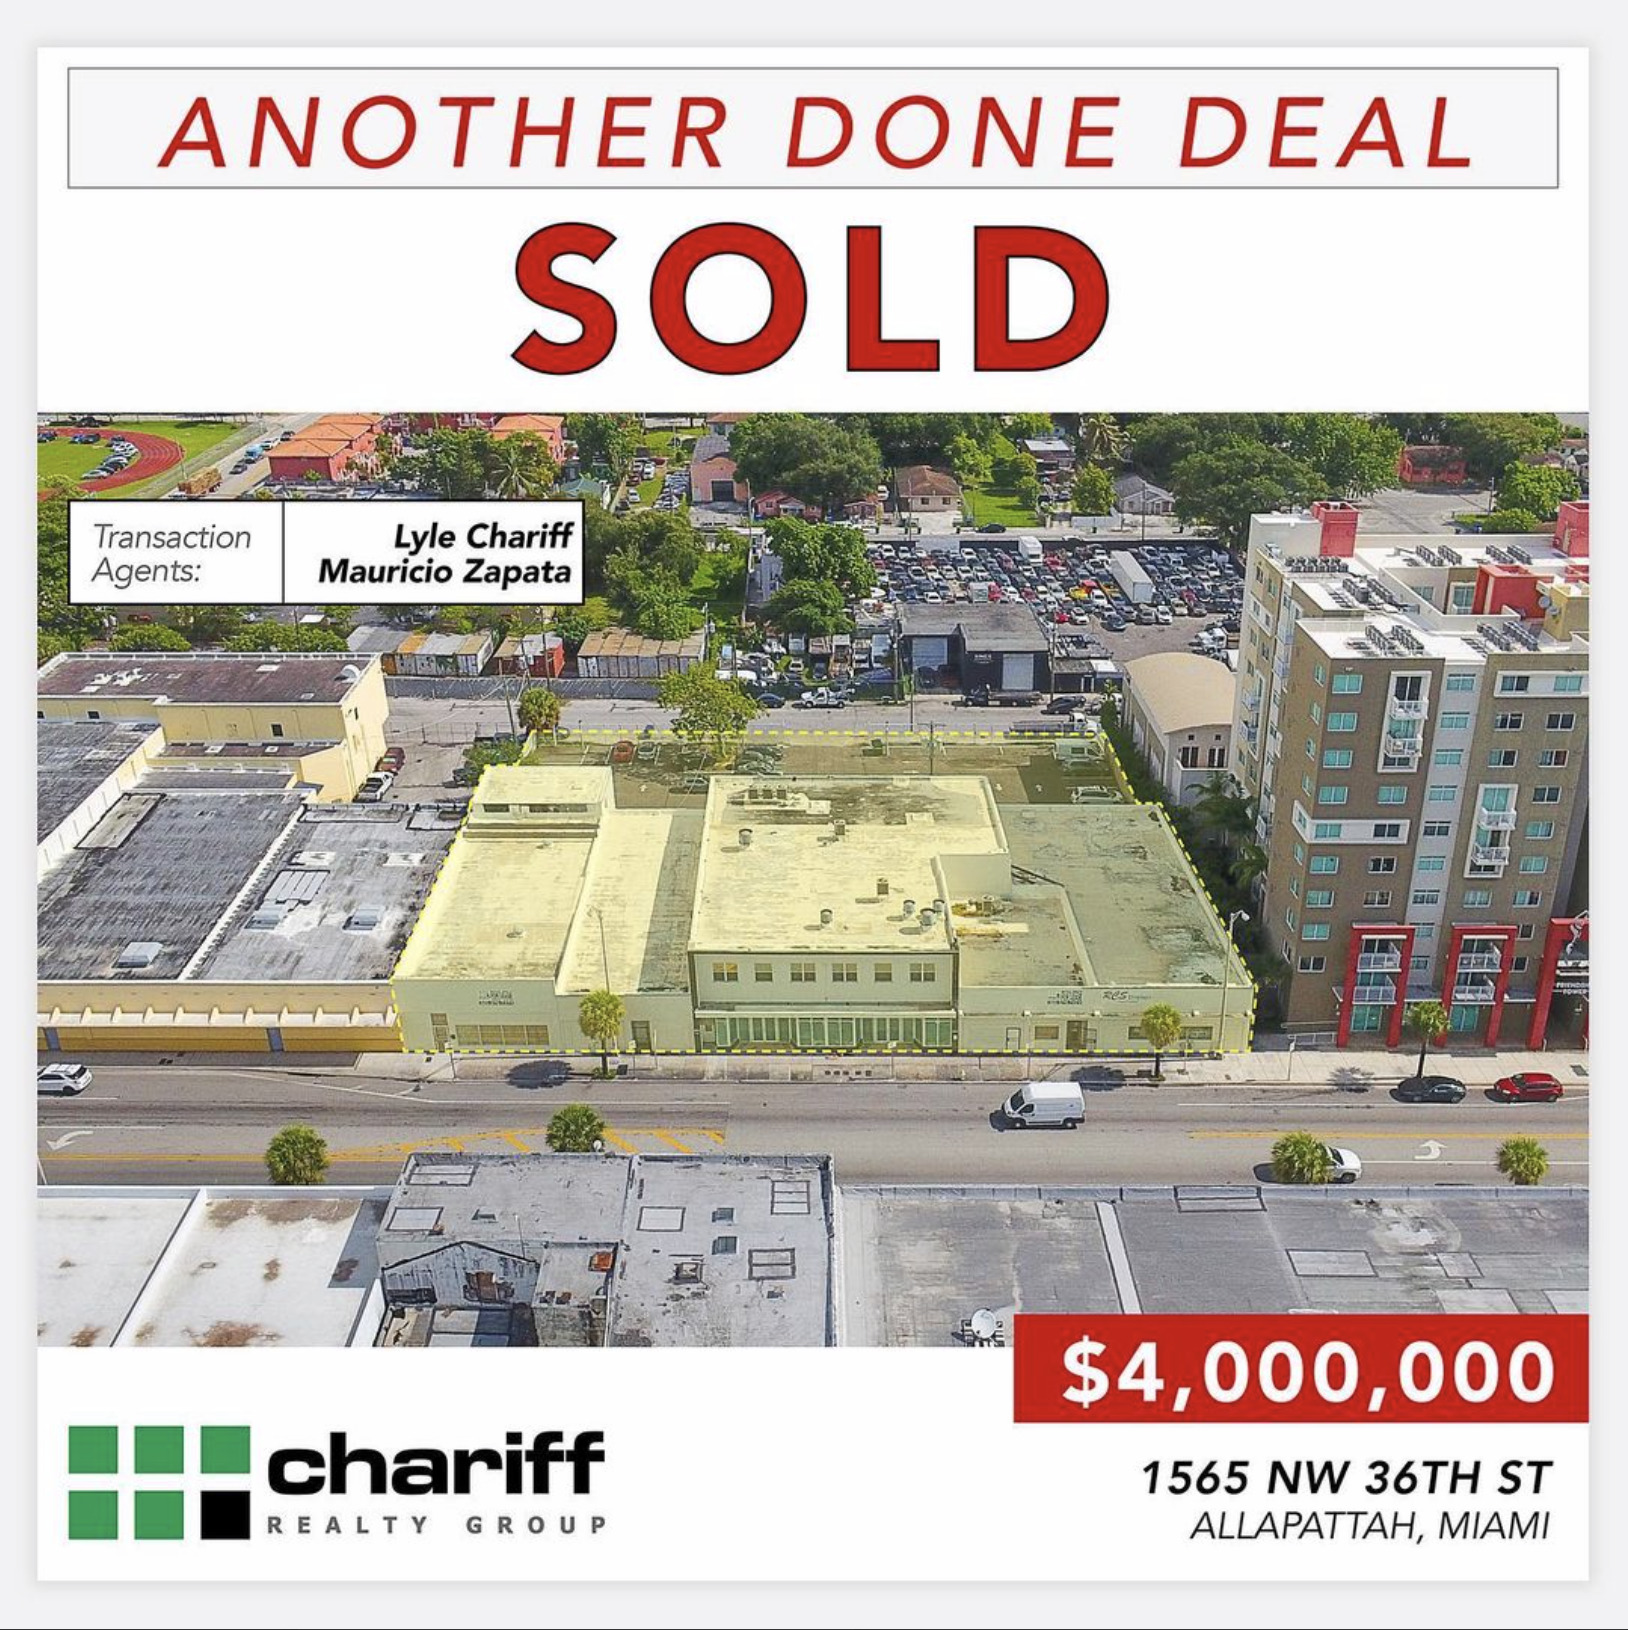 1565 NW 36th St - Another Done Deal - Miami - Allapatah - Sold - Chariff Realty Group